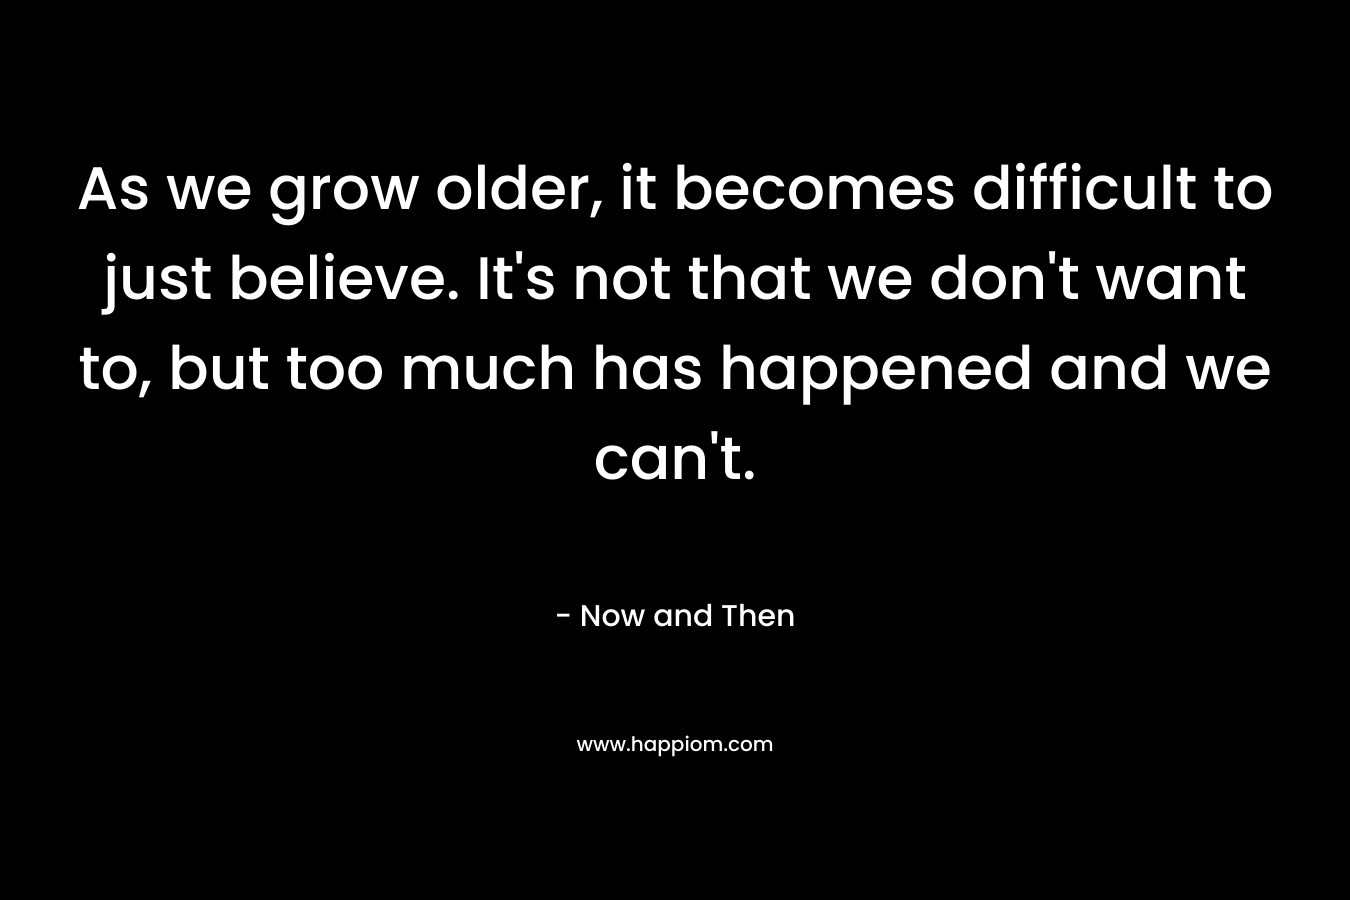 As we grow older, it becomes difficult to just believe. It's not that we don't want to, but too much has happened and we can't.